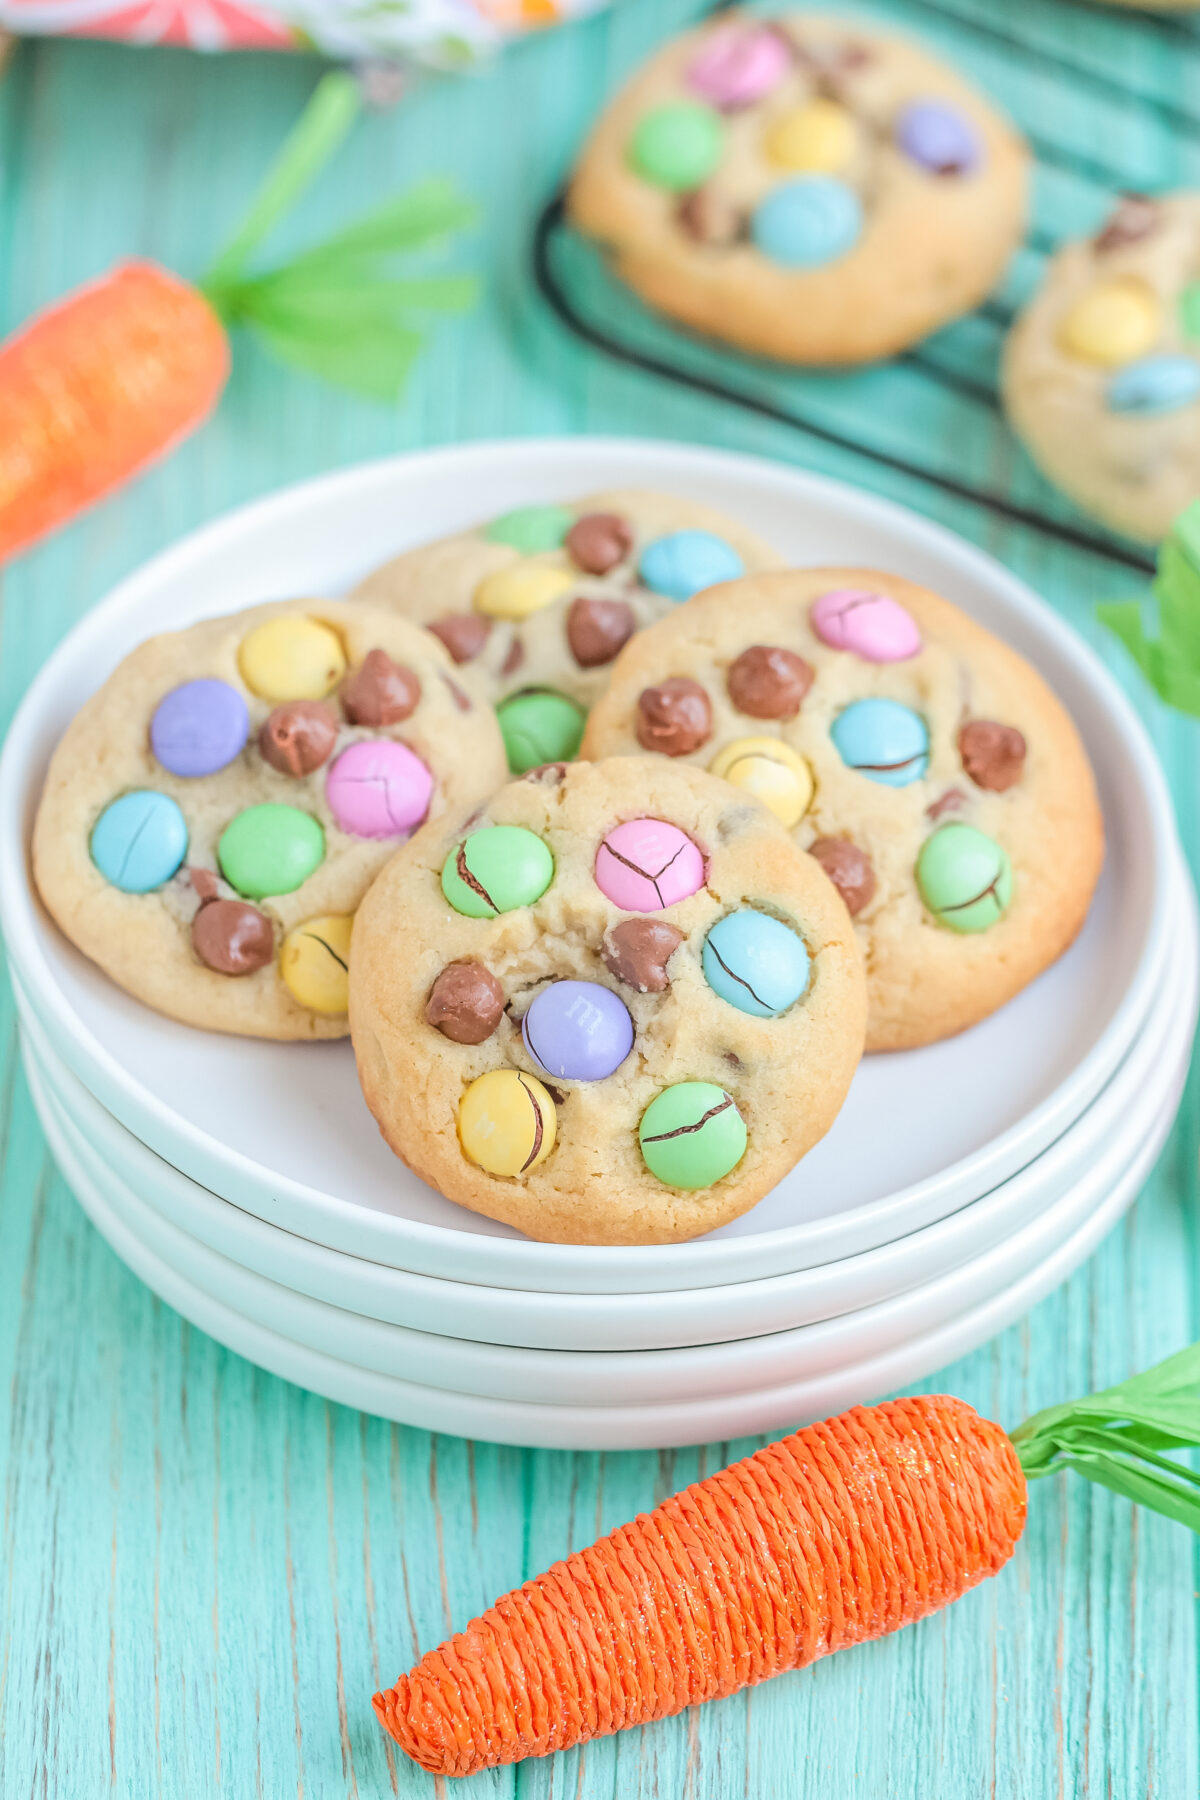 Make your Easter celebrations even sweeter with this delicious, easy-to-follow recipe for homemade Easter chocolate chip cookies.